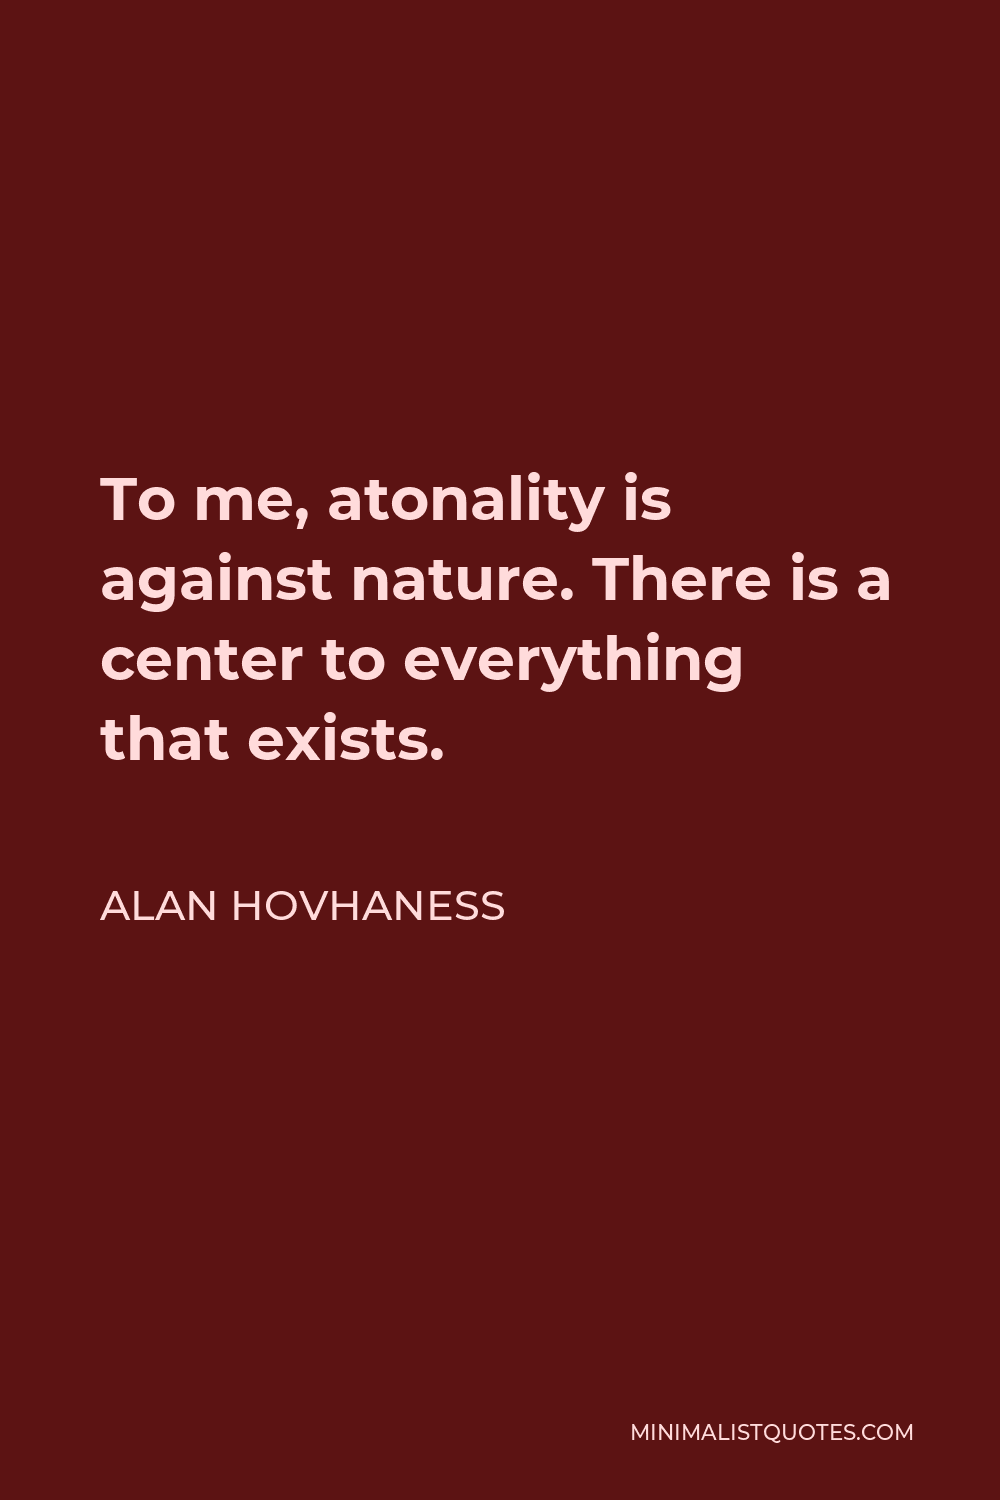 Alan Hovhaness Quote - To me, atonality is against nature. There is a center to everything that exists.